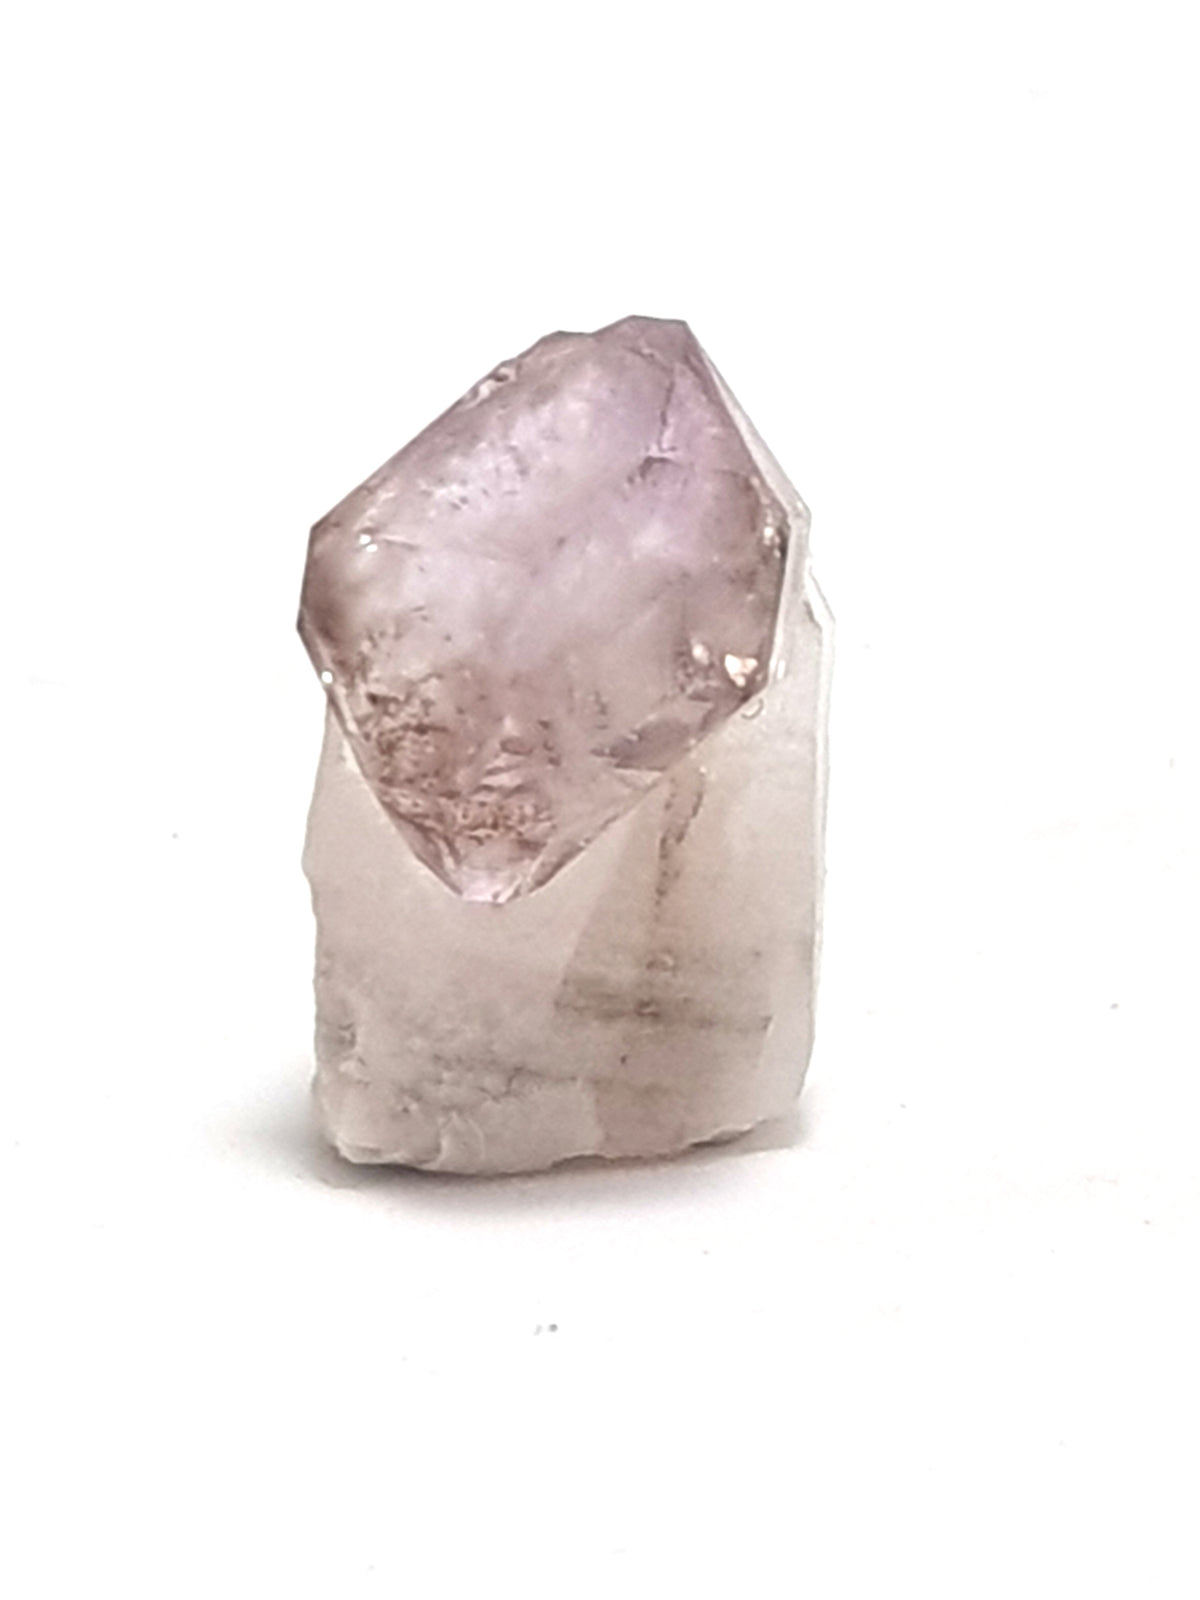 amethyst sceptre micromount. This is a double terminated amethyst crystal on a white quartz point